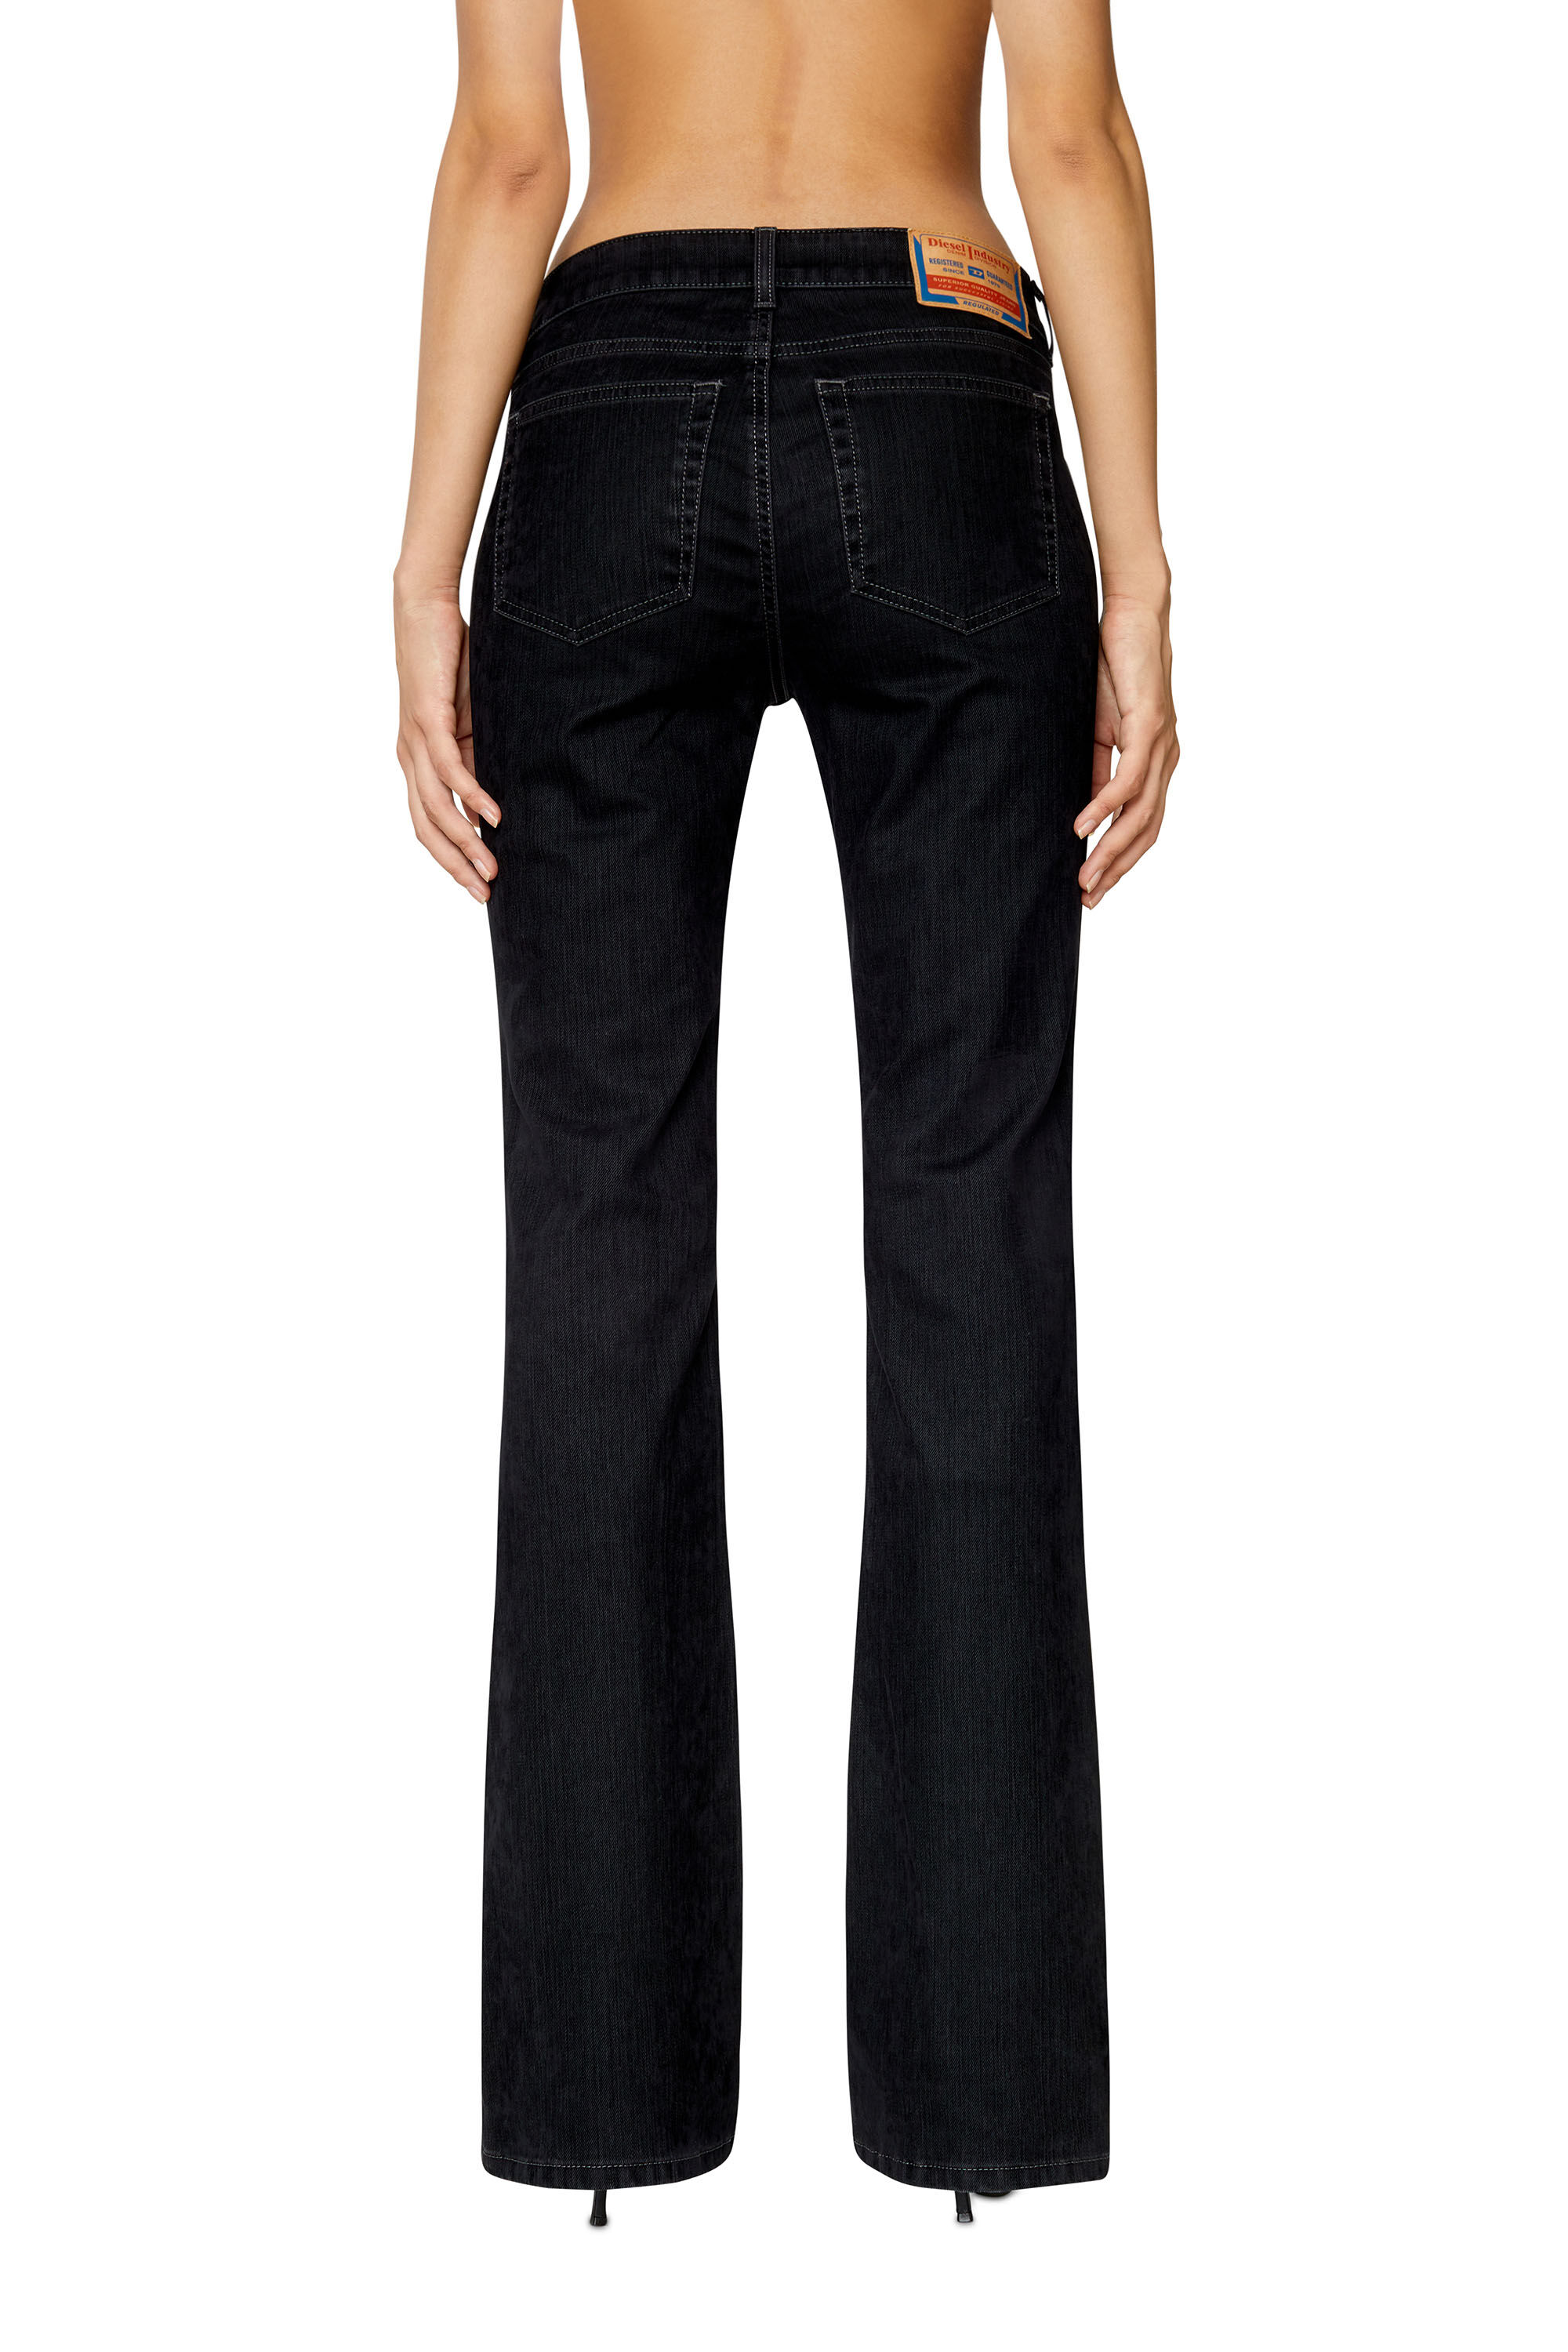 Diesel - 1969 D-Ebbey 0IHAO Bootcut and Flare Jeans,  - Image 4